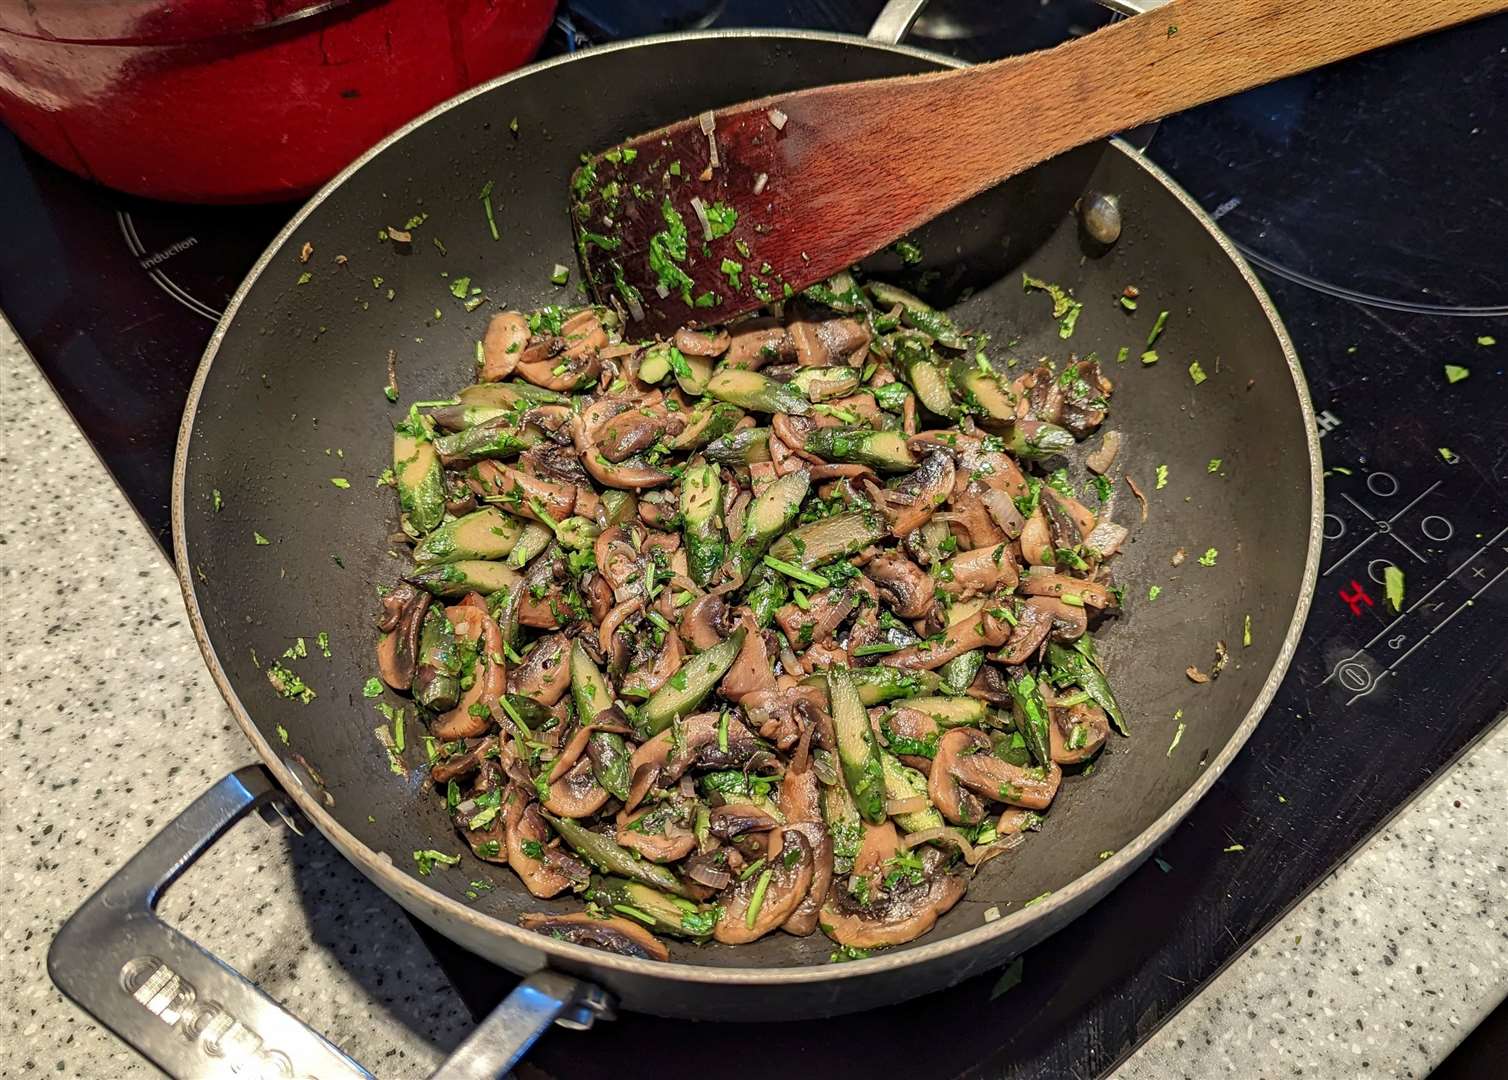 Mushrooms and asparagus from the Folkestone Community Fridge being cooked up for dinner